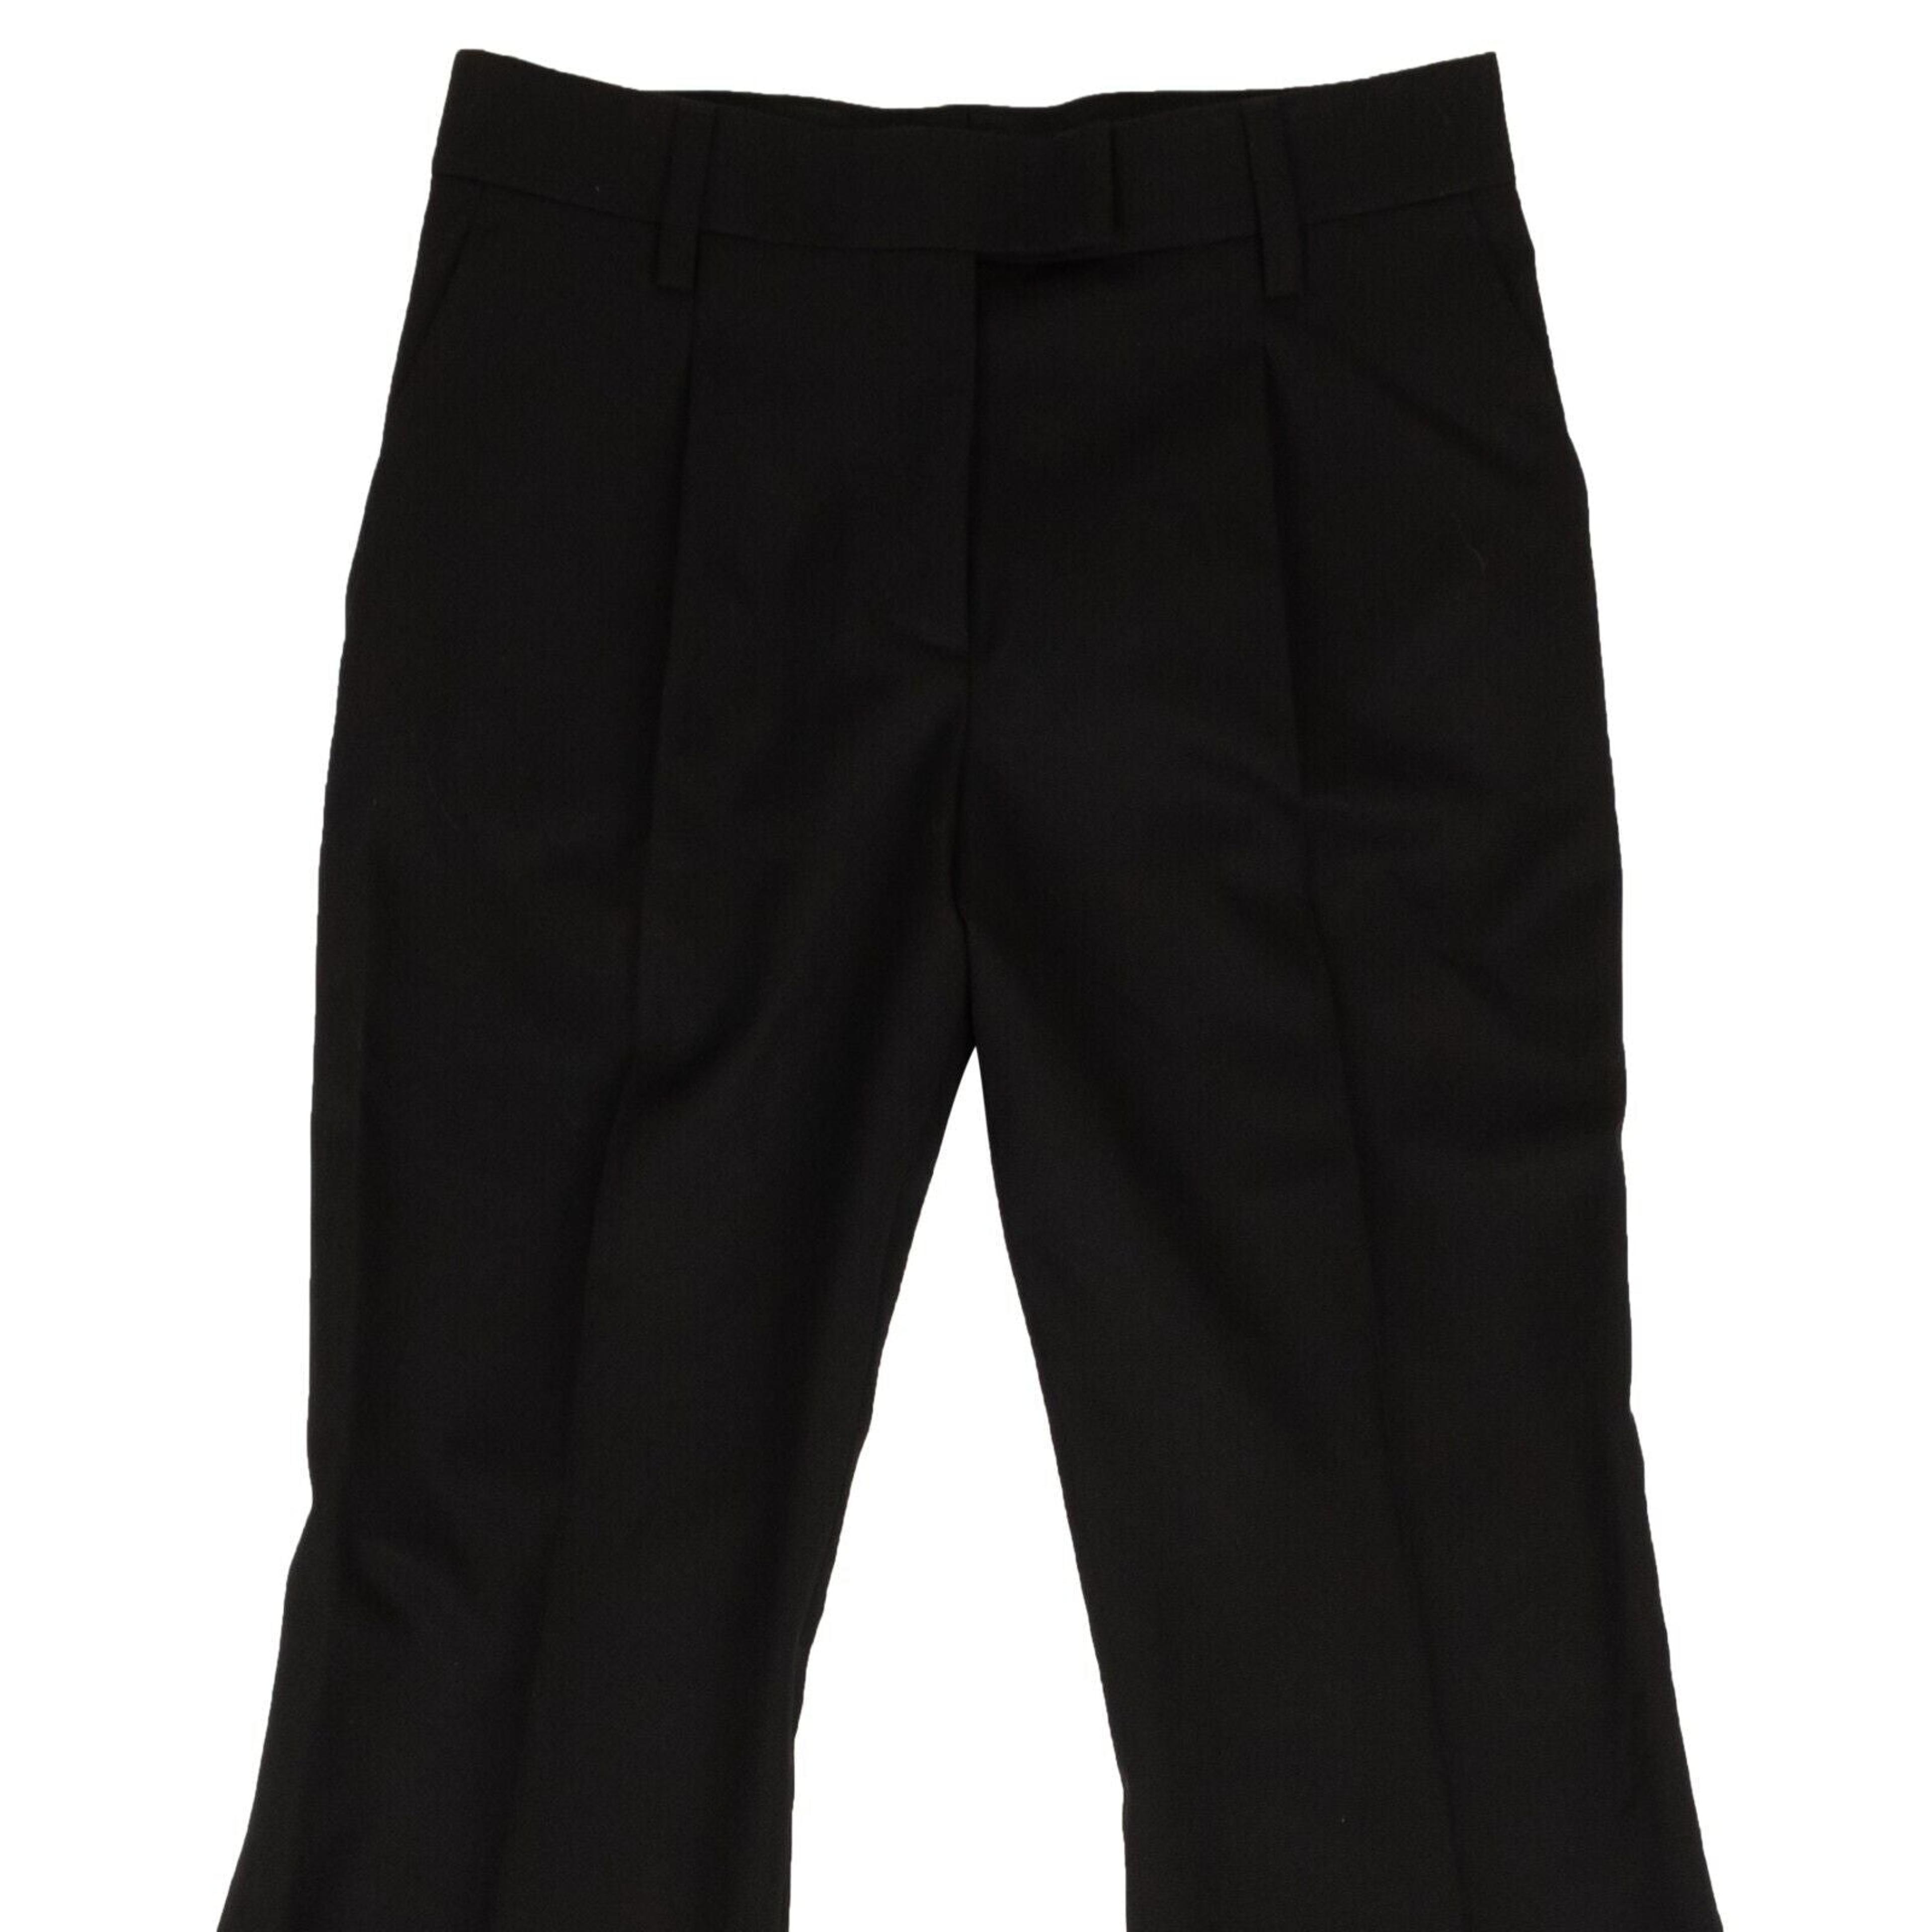 Alternate View 1 of Black Cotton Bell Buttom Casual Pants